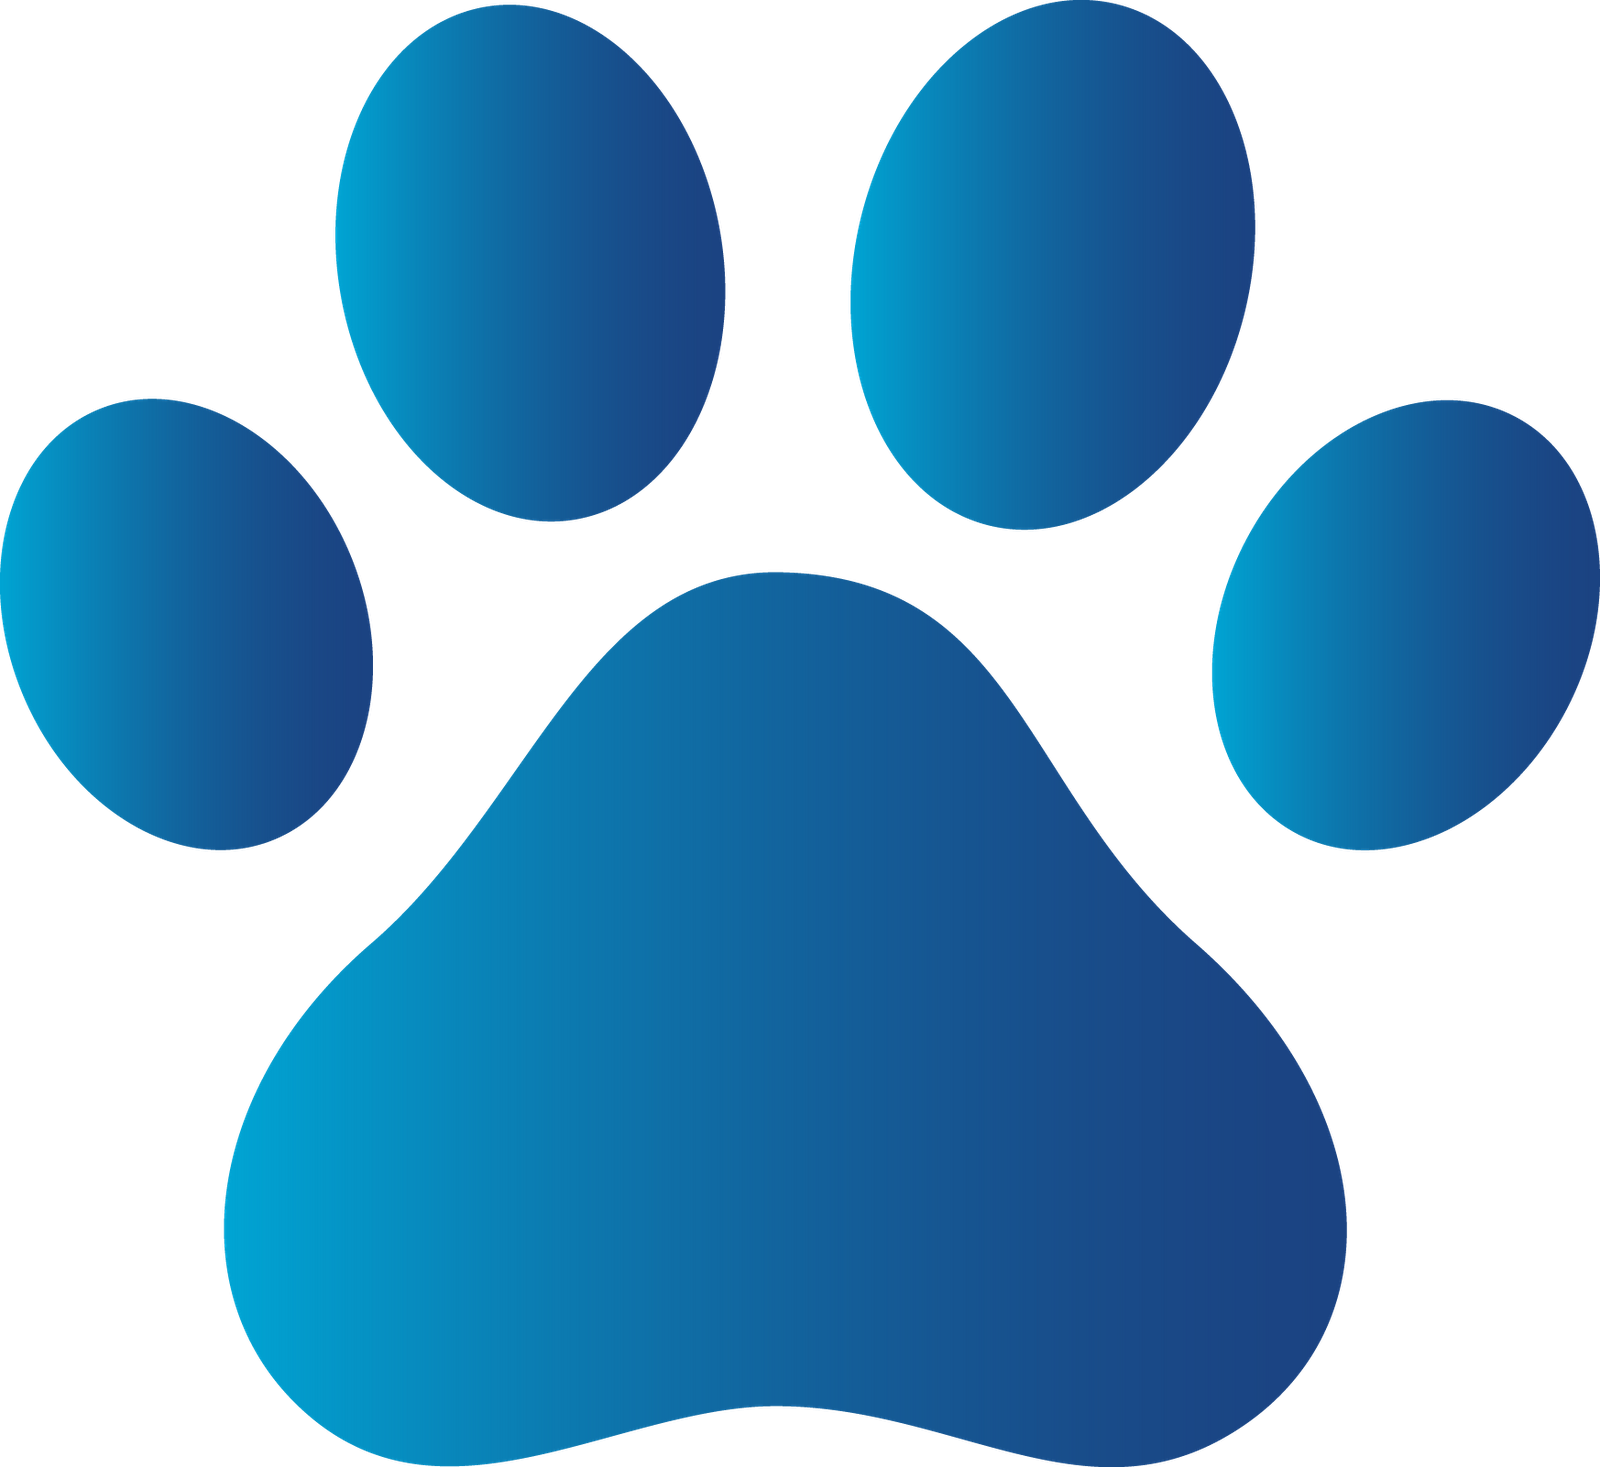 Free Paw Prints Download Free Paw Prints Png Images Free Cliparts On